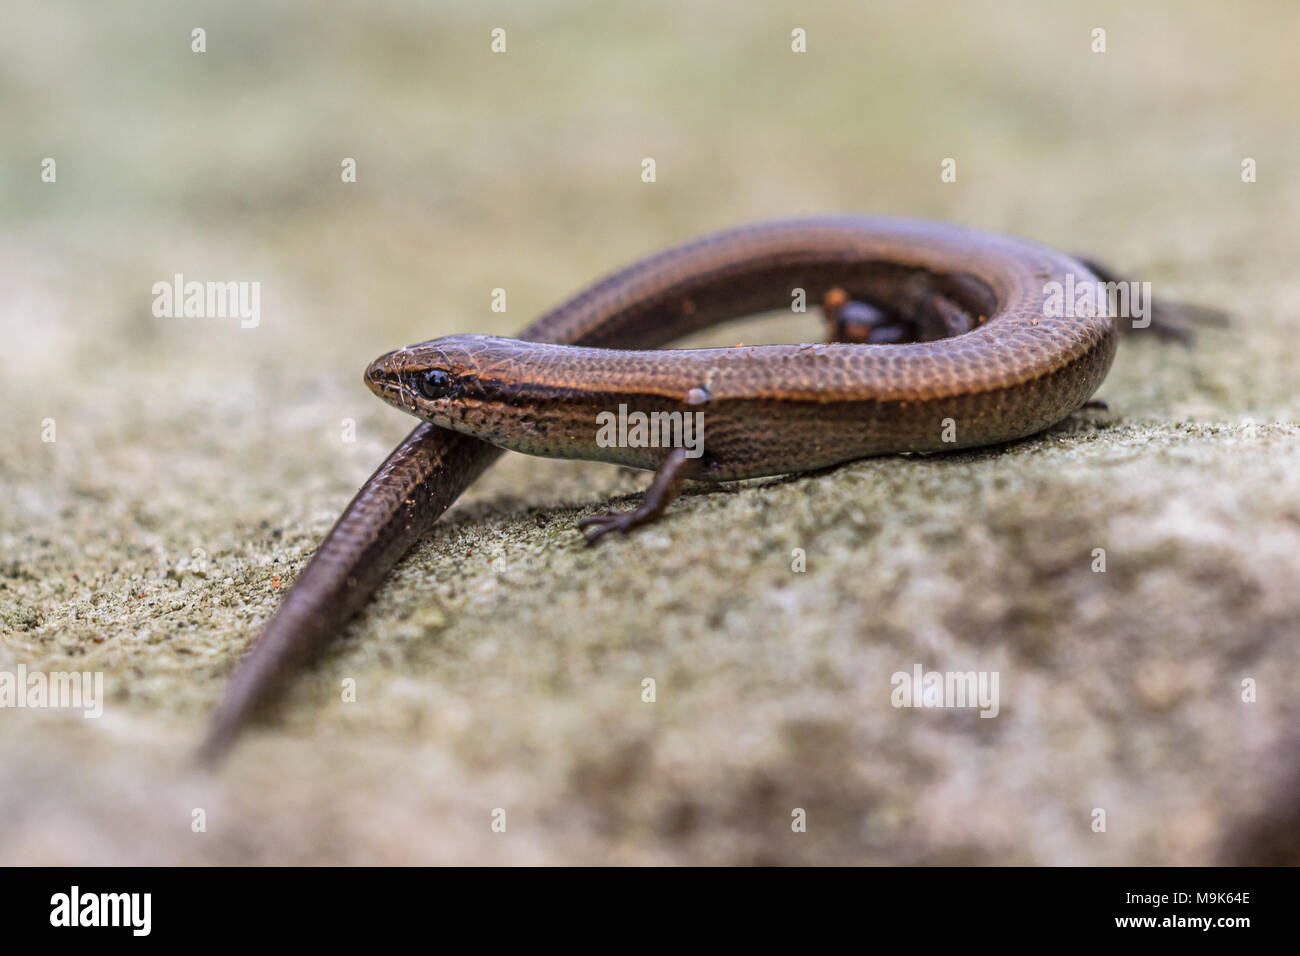 European copper skink (Ablepharus kitaibelii) perched on rocky underground Stock Photo